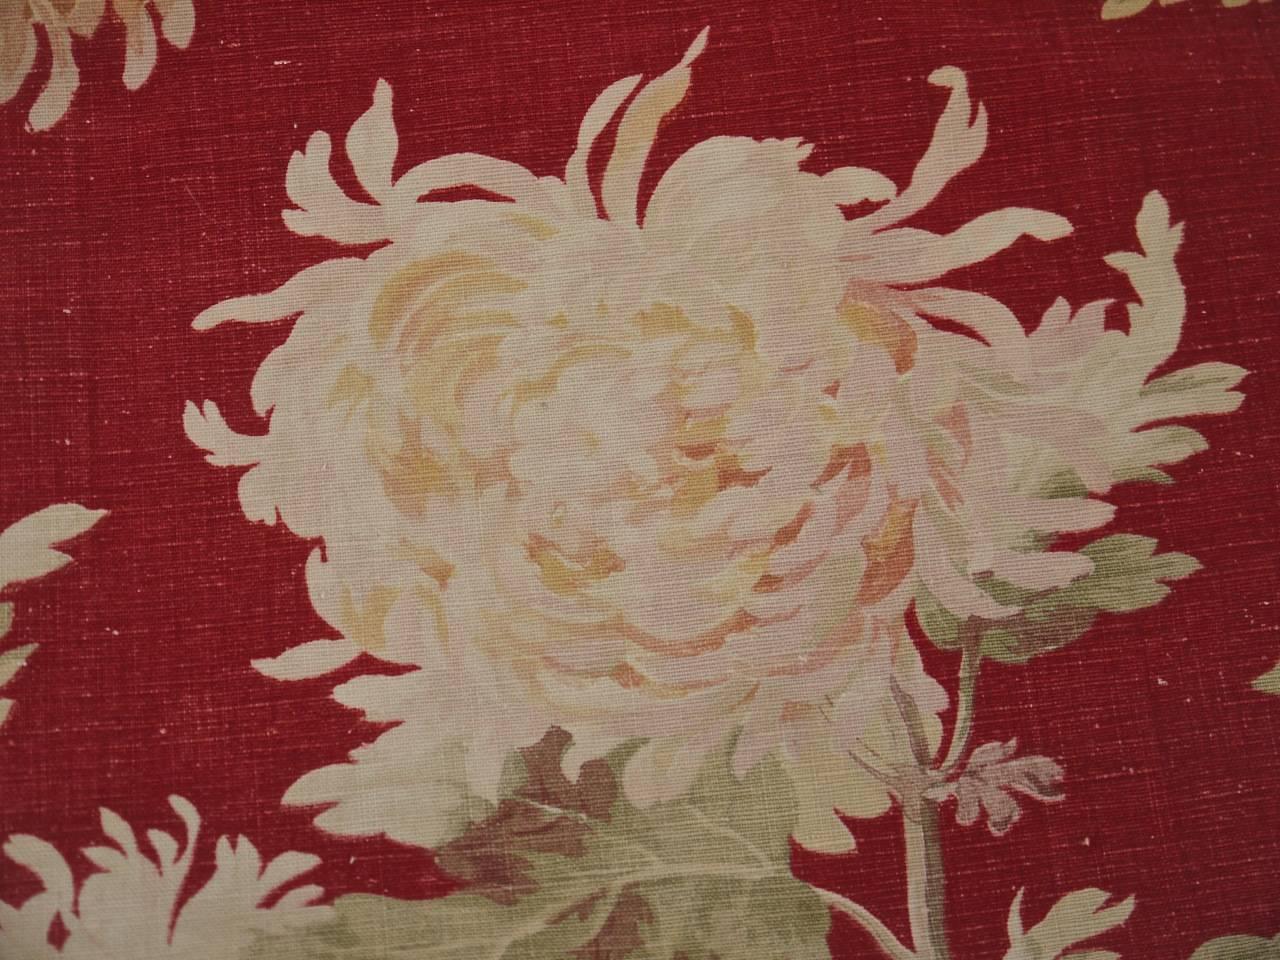 French Provincial Late 19th Century French Large-Scale Floral on Red Cotton Throw